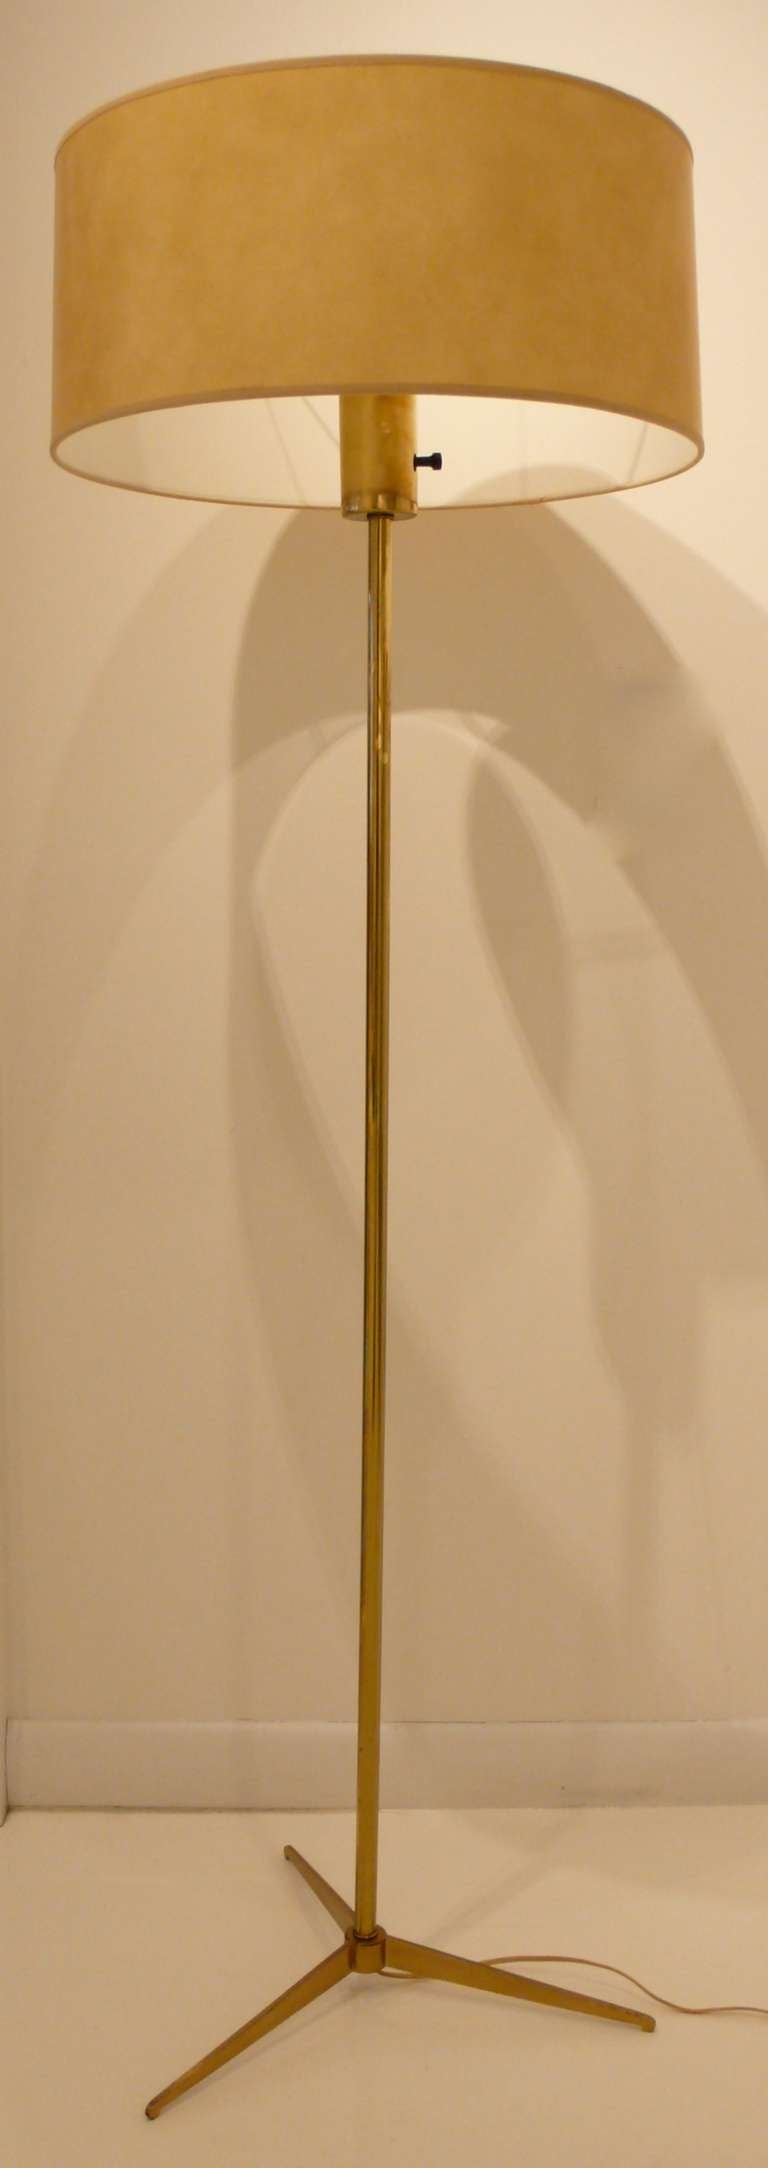 Floor lamp of brass-plated metal with a tripod base by Ernest Lowy for Koch and Lowy, c. 1950's.  Custom parchment shade made on original wire frame.  Areas of wear to the brass plating; otherwise excellent condition.  Ref: Hennessey, 